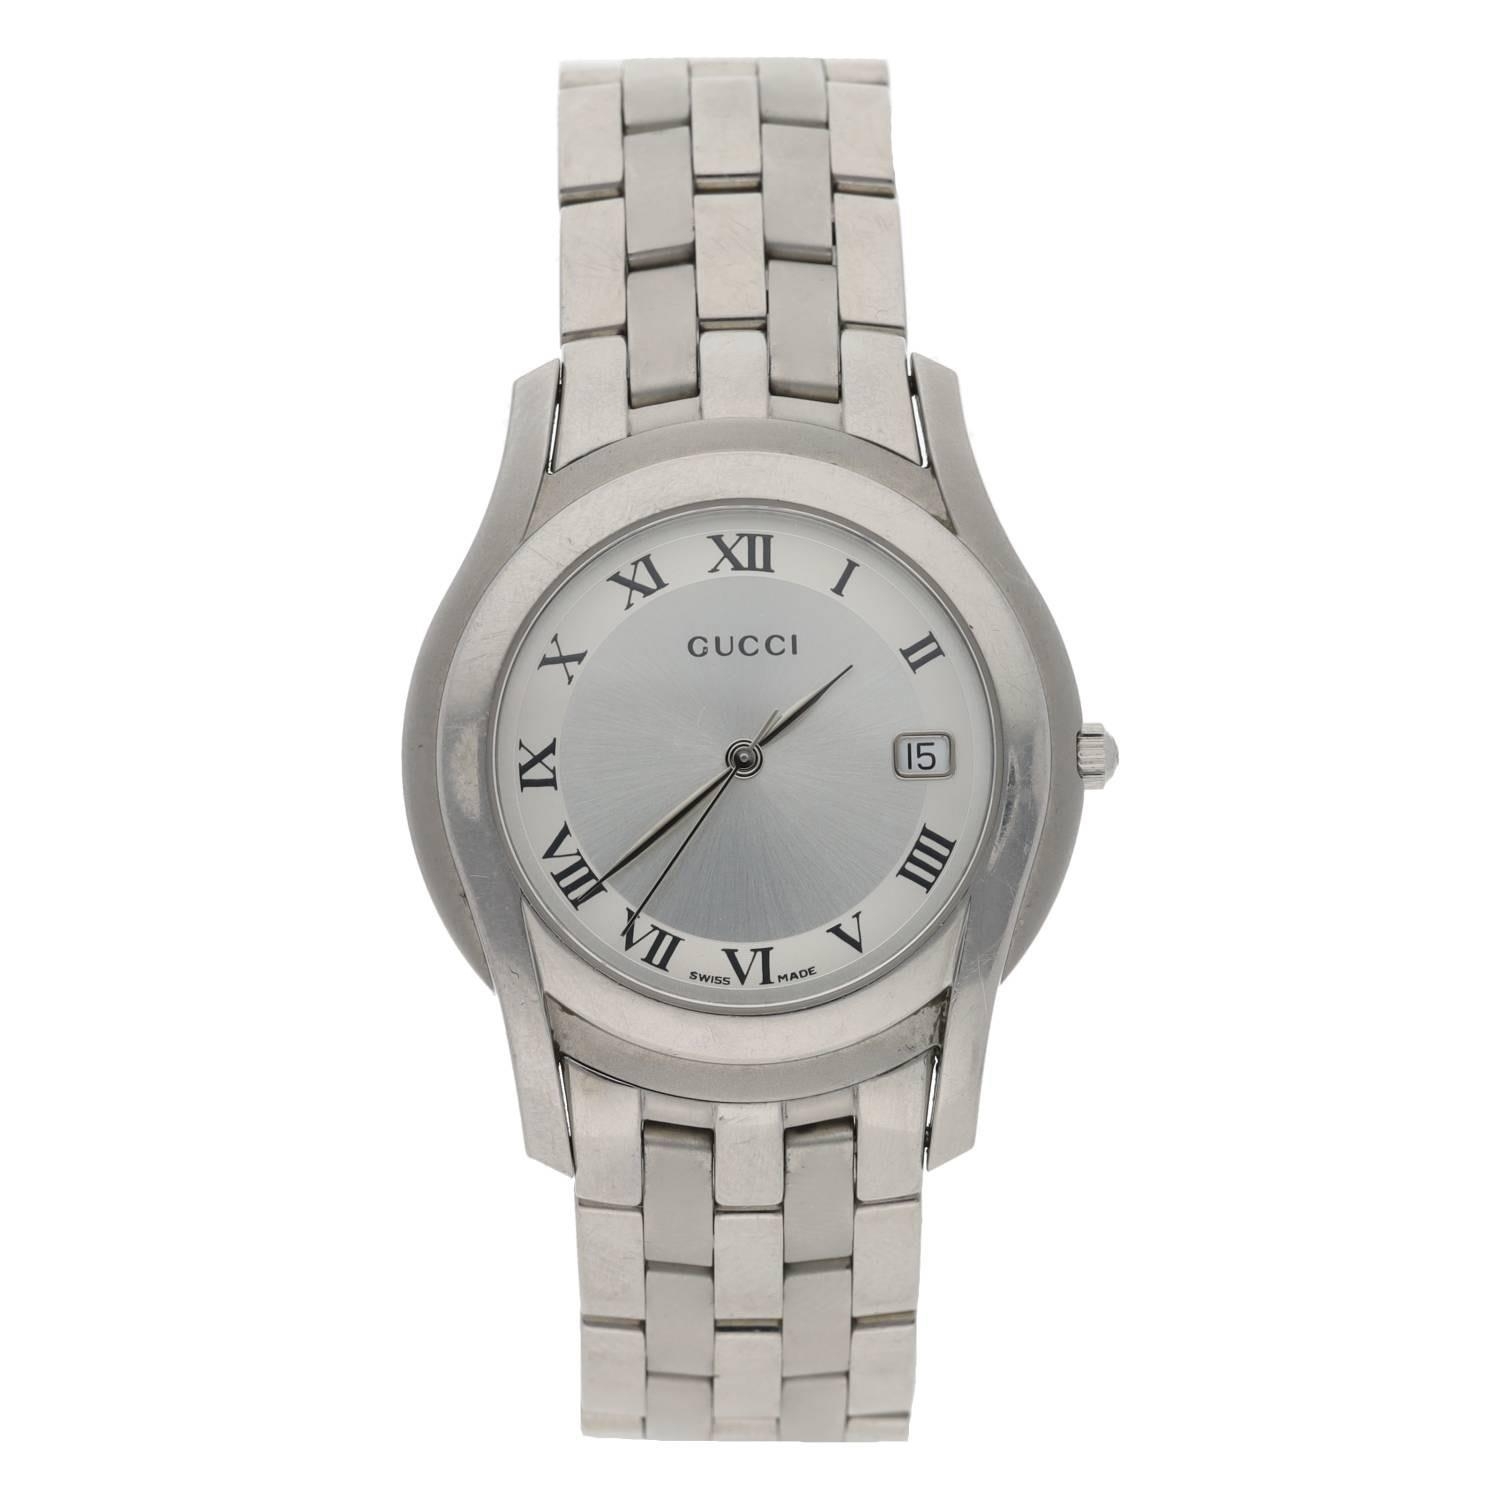 Gucci stainless steel gentleman's wristwatch, reference no. 5500M, serial no.  10420xxx, silver